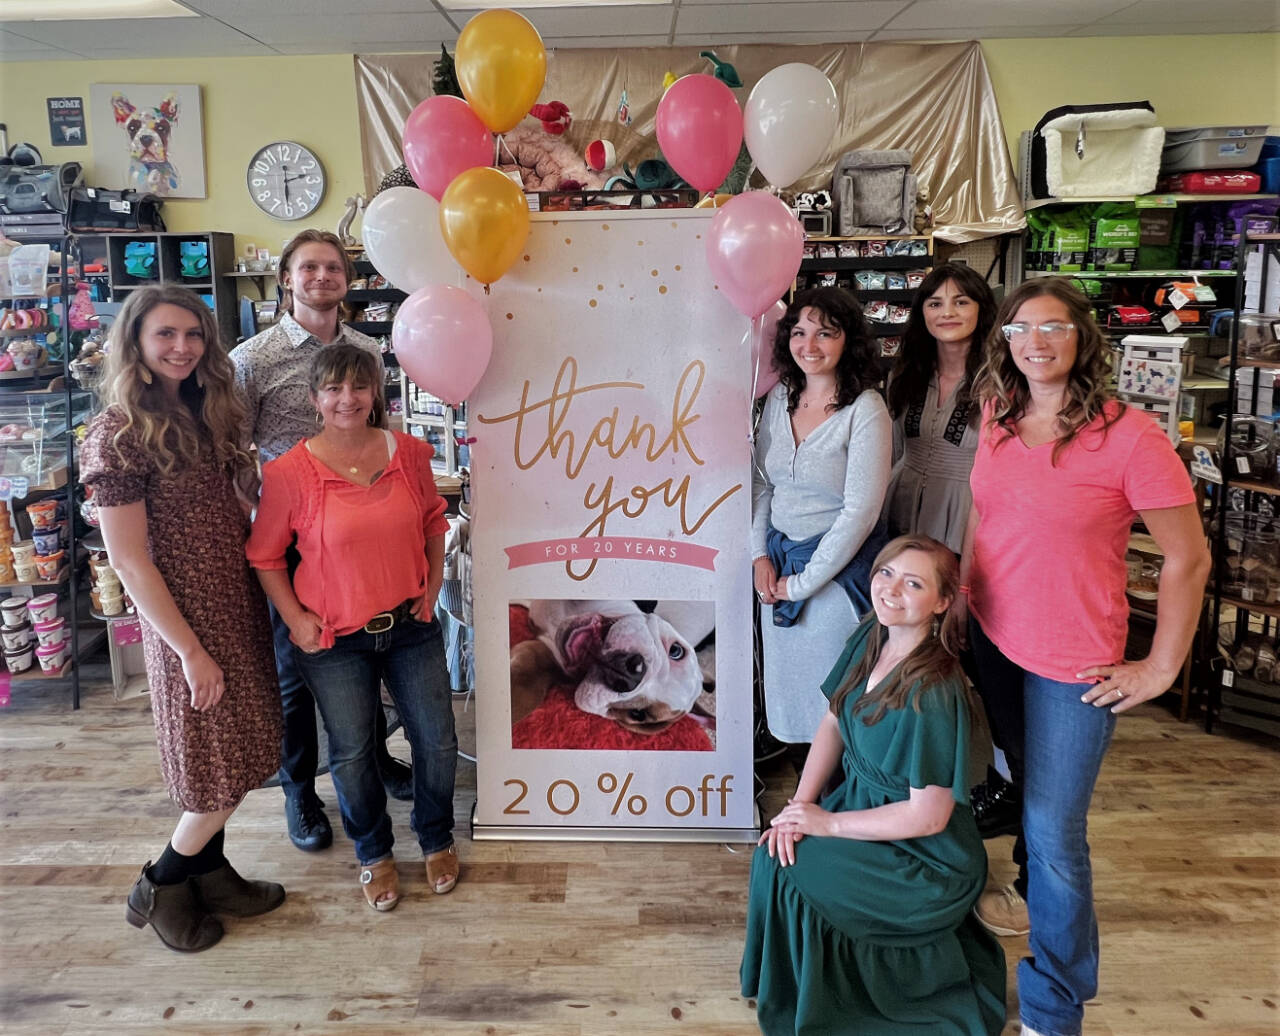 Photo courtesy of Best Friend Nutrition / Best Friend Nutrition staffers (from left) Kayla, Blaide, Cynthia, Julianna, Eden (in front), Deanna and Tara celebrate the store’s 20th aniversary this month.